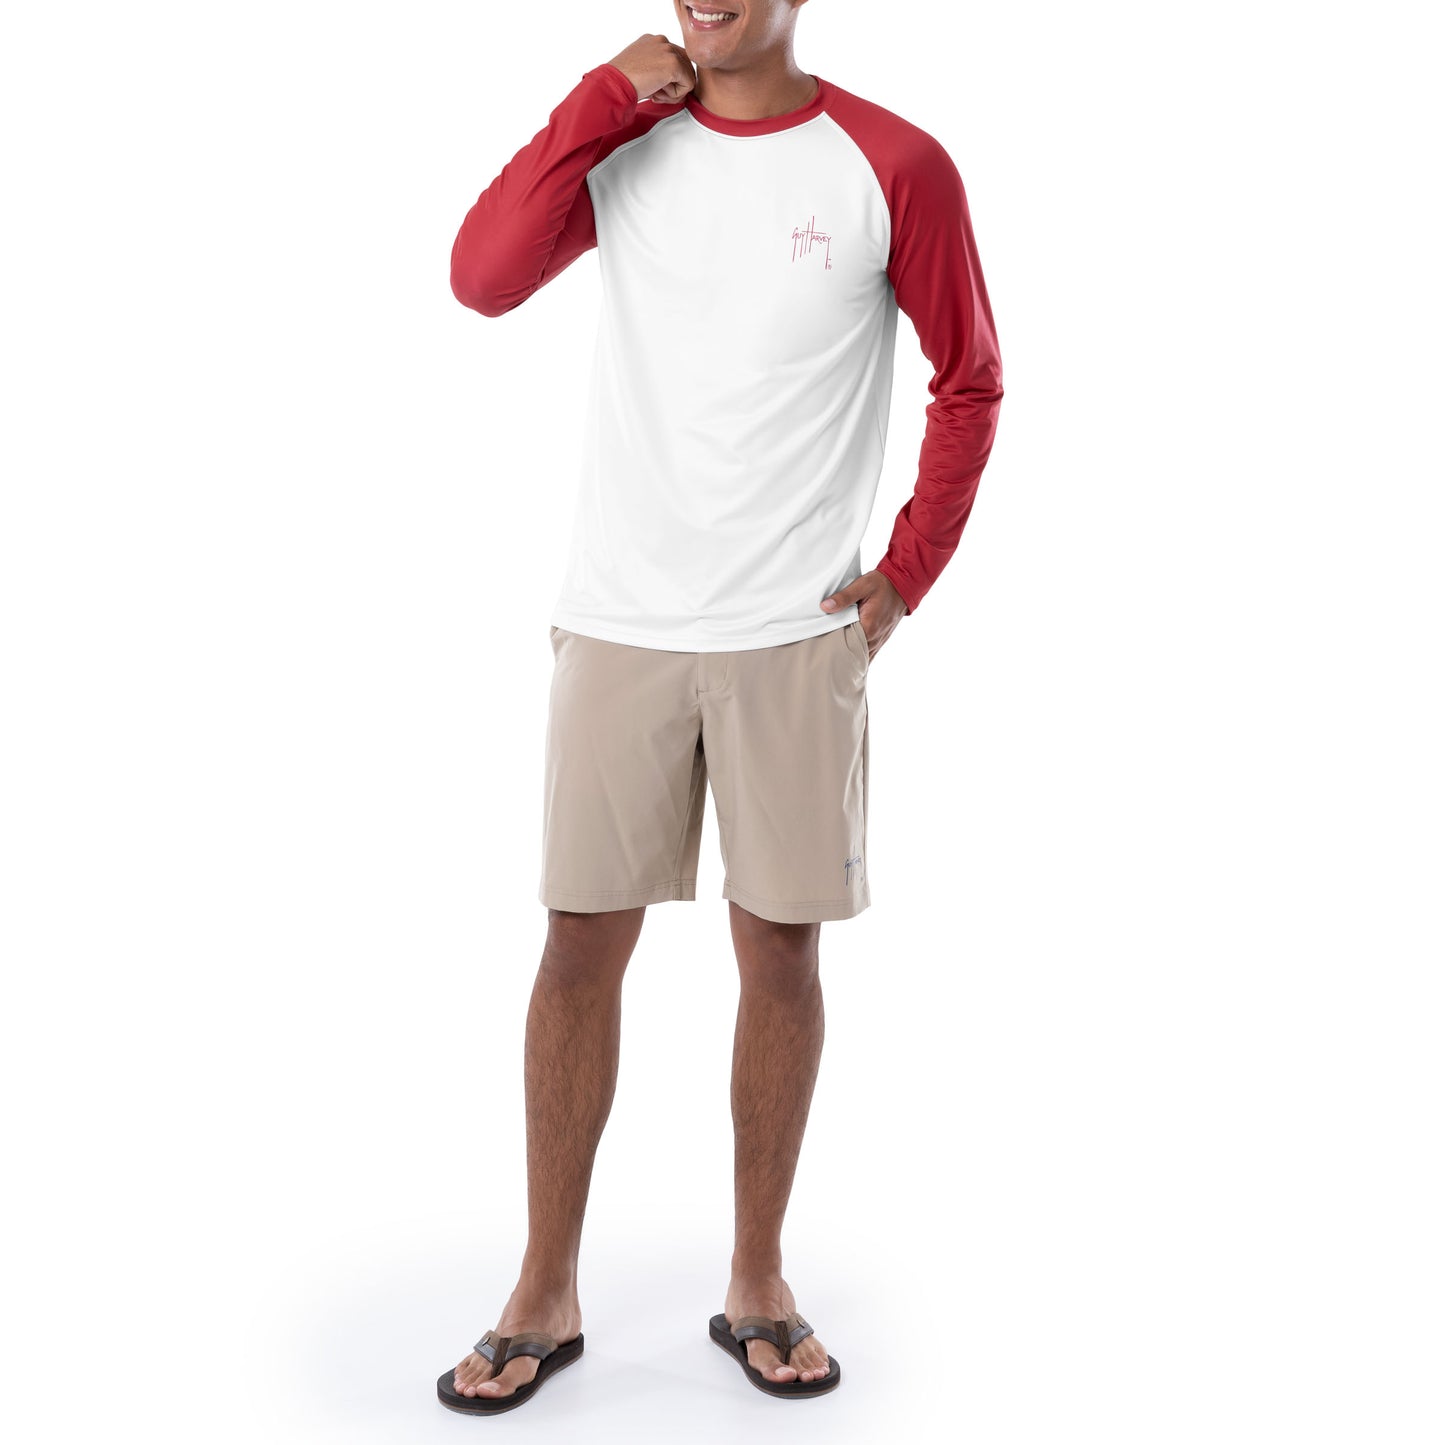 Men's American Shield Colorblocked Sun Protection Top View 5